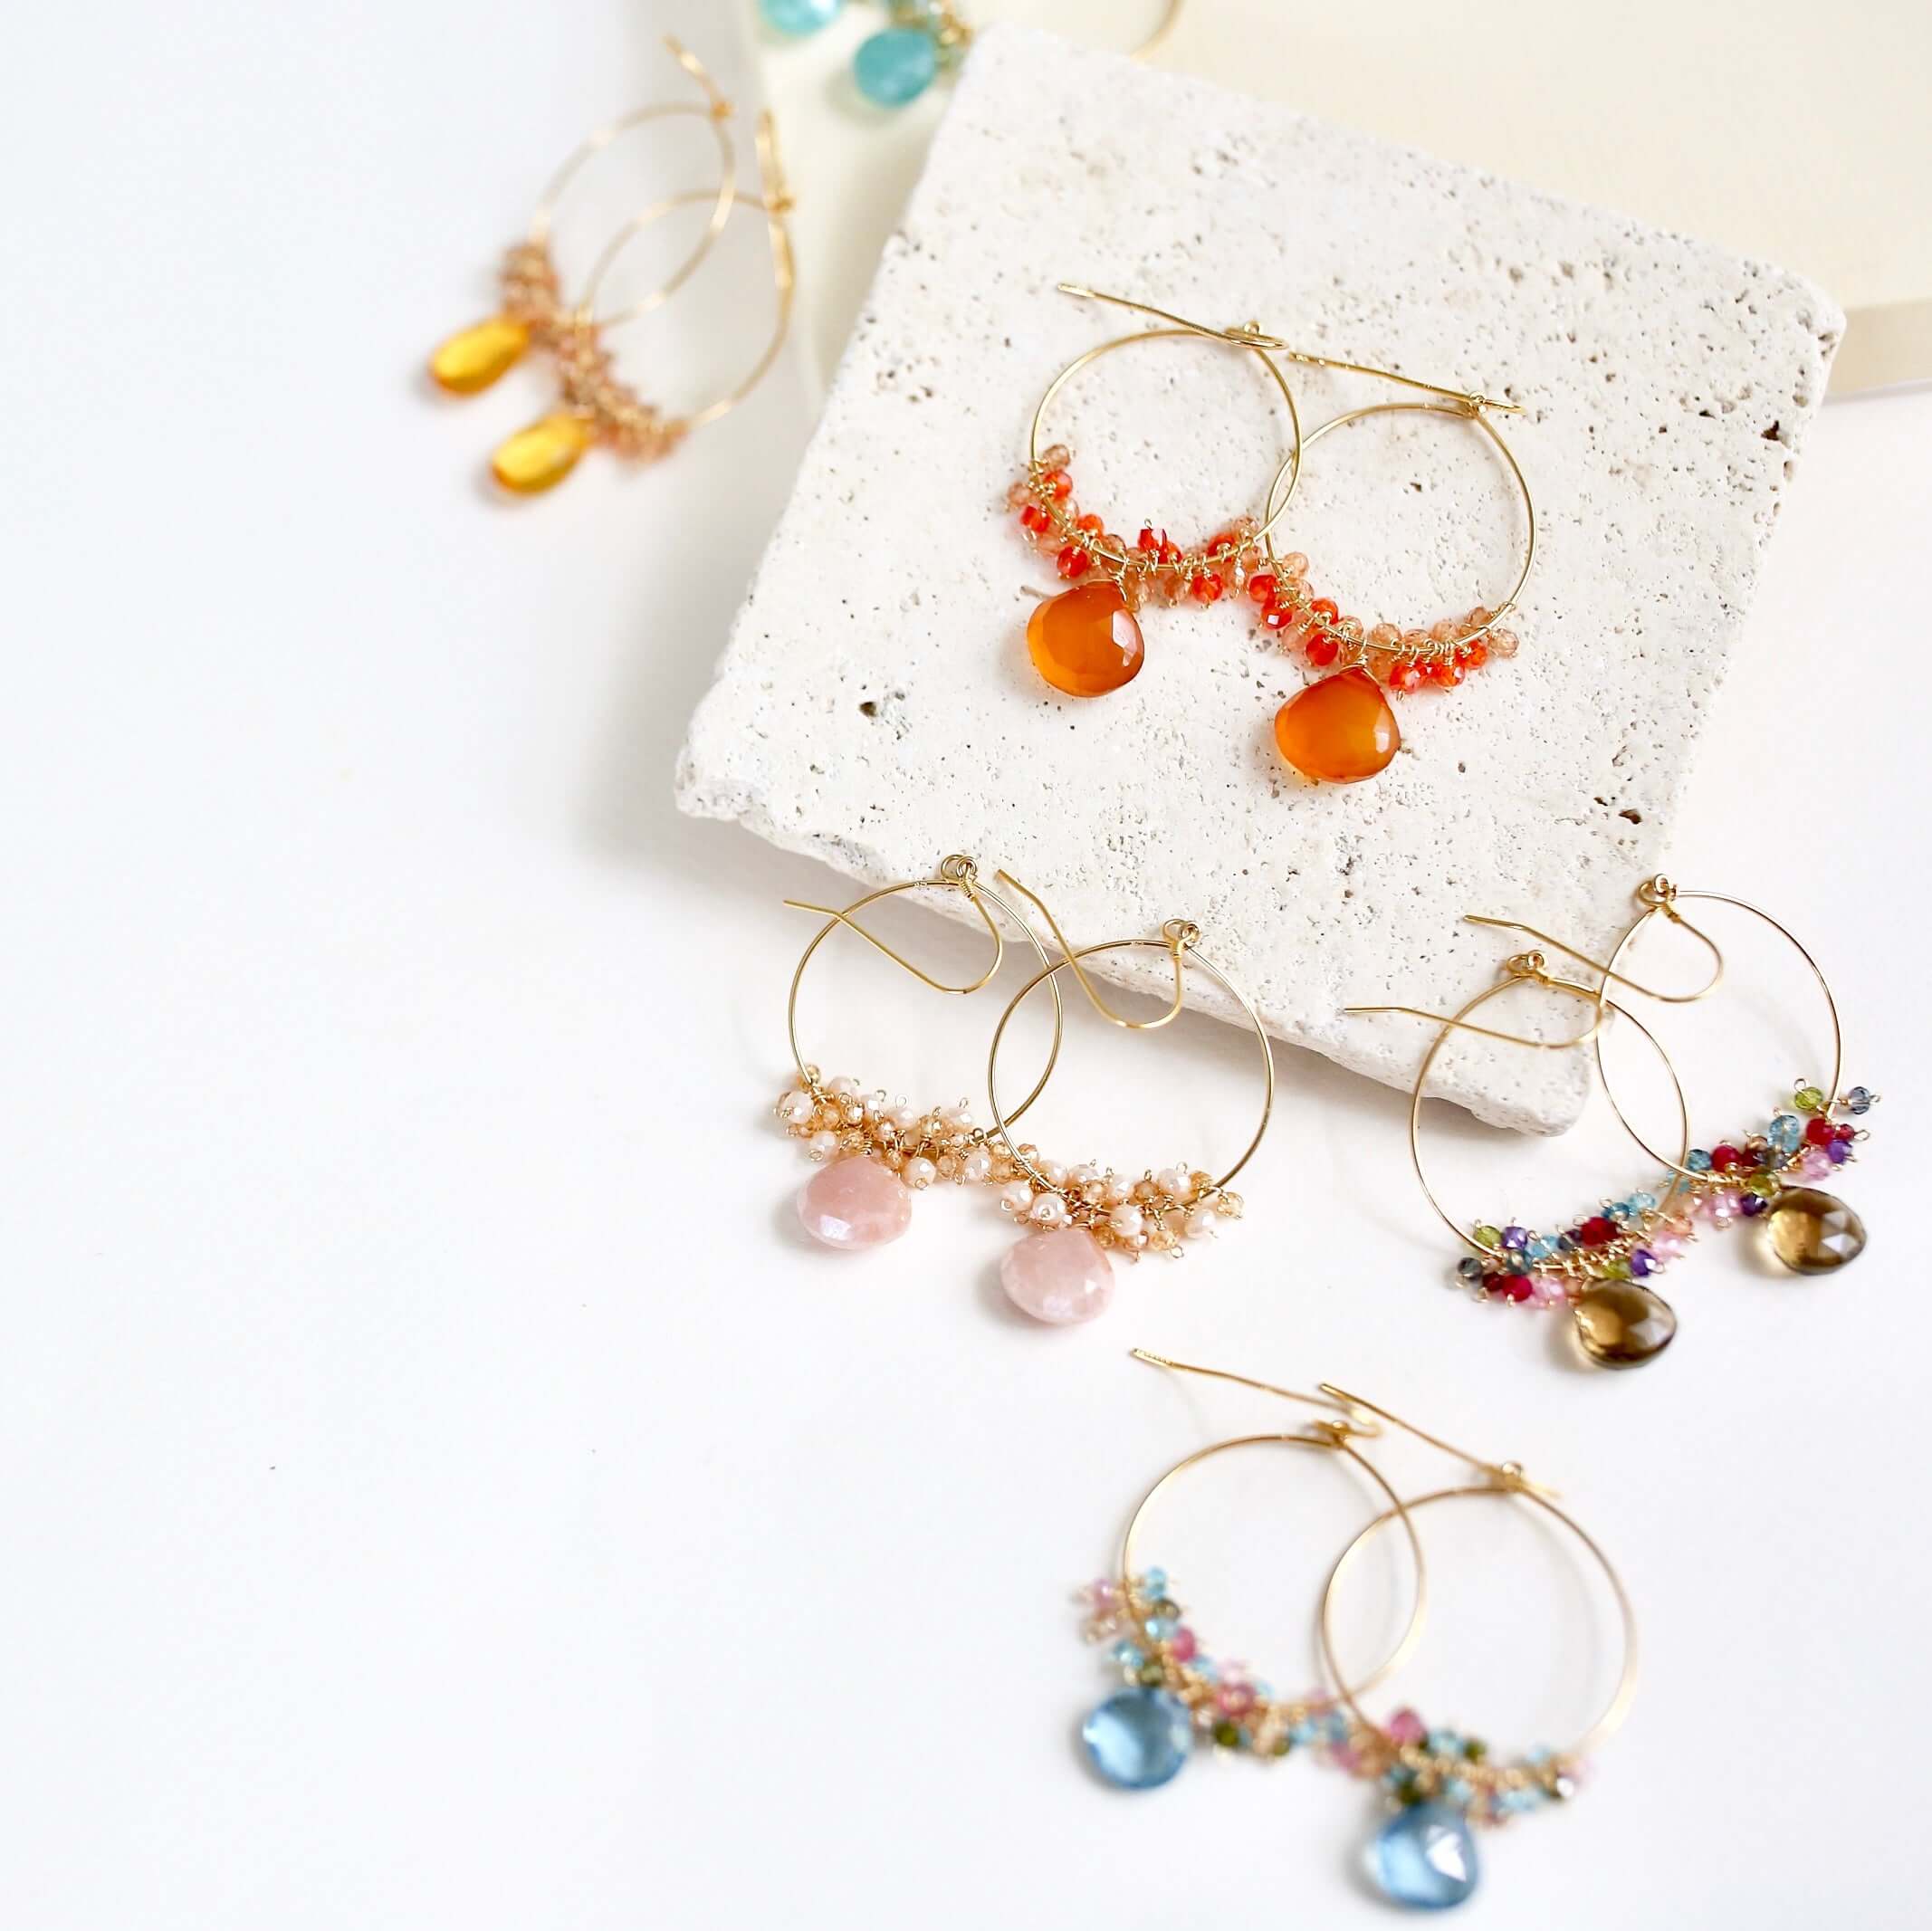 Swing Earrings featuring Colorful gemstones and French hooks for a touch of effortless elegance